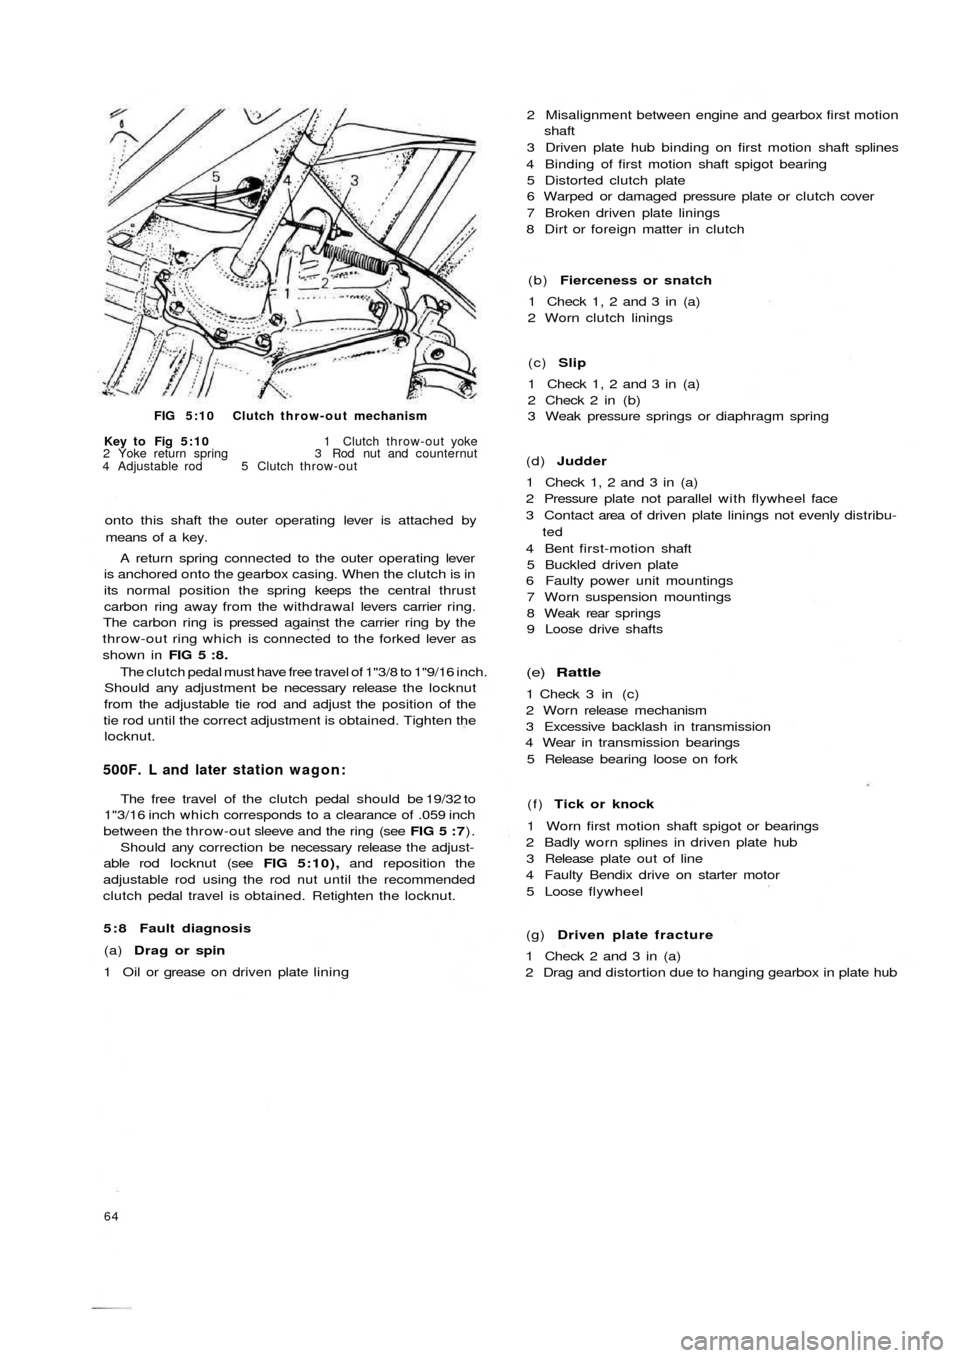 FIAT 500 1969 1.G Workshop Manual FIG 5:10 Clutch throw-out mechanism
Key to  Fig  5:10 1 Clutch throw-out yoke
2 Yoke return spring 3 Rod nut and counternut
4 Adjustable rod  5  Clutch throw-out
onto this shaft the outer operating le